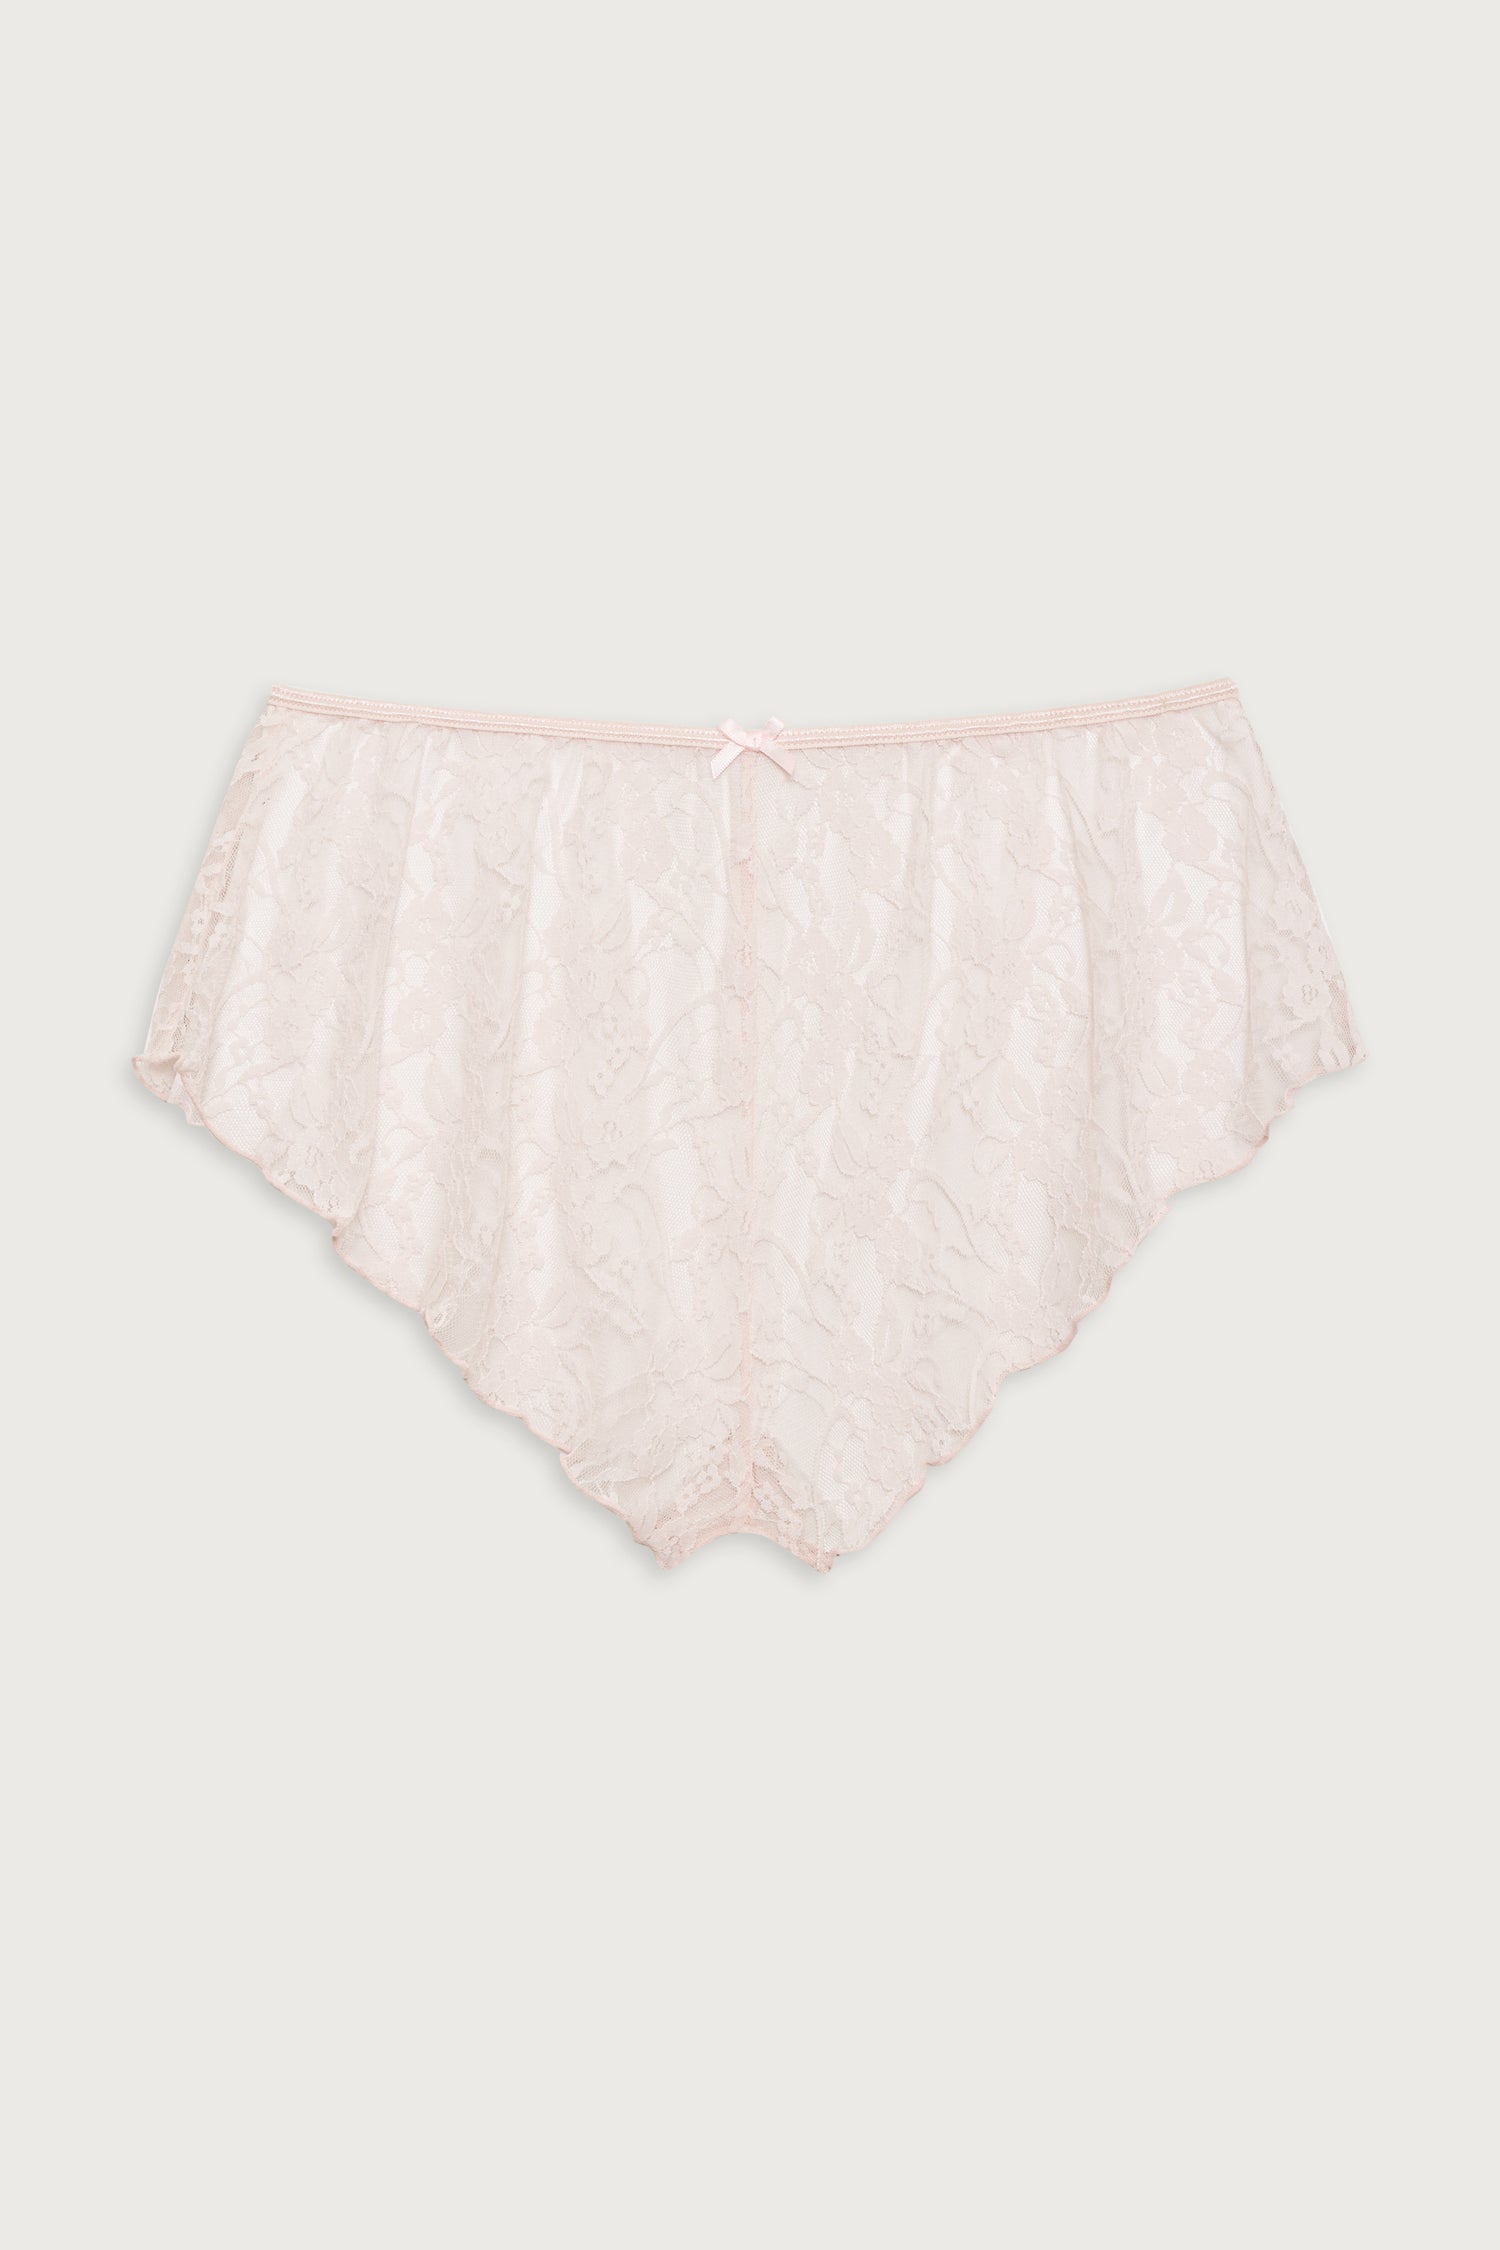 Meadow Lace Mini Short - Baby Bouquet Pink